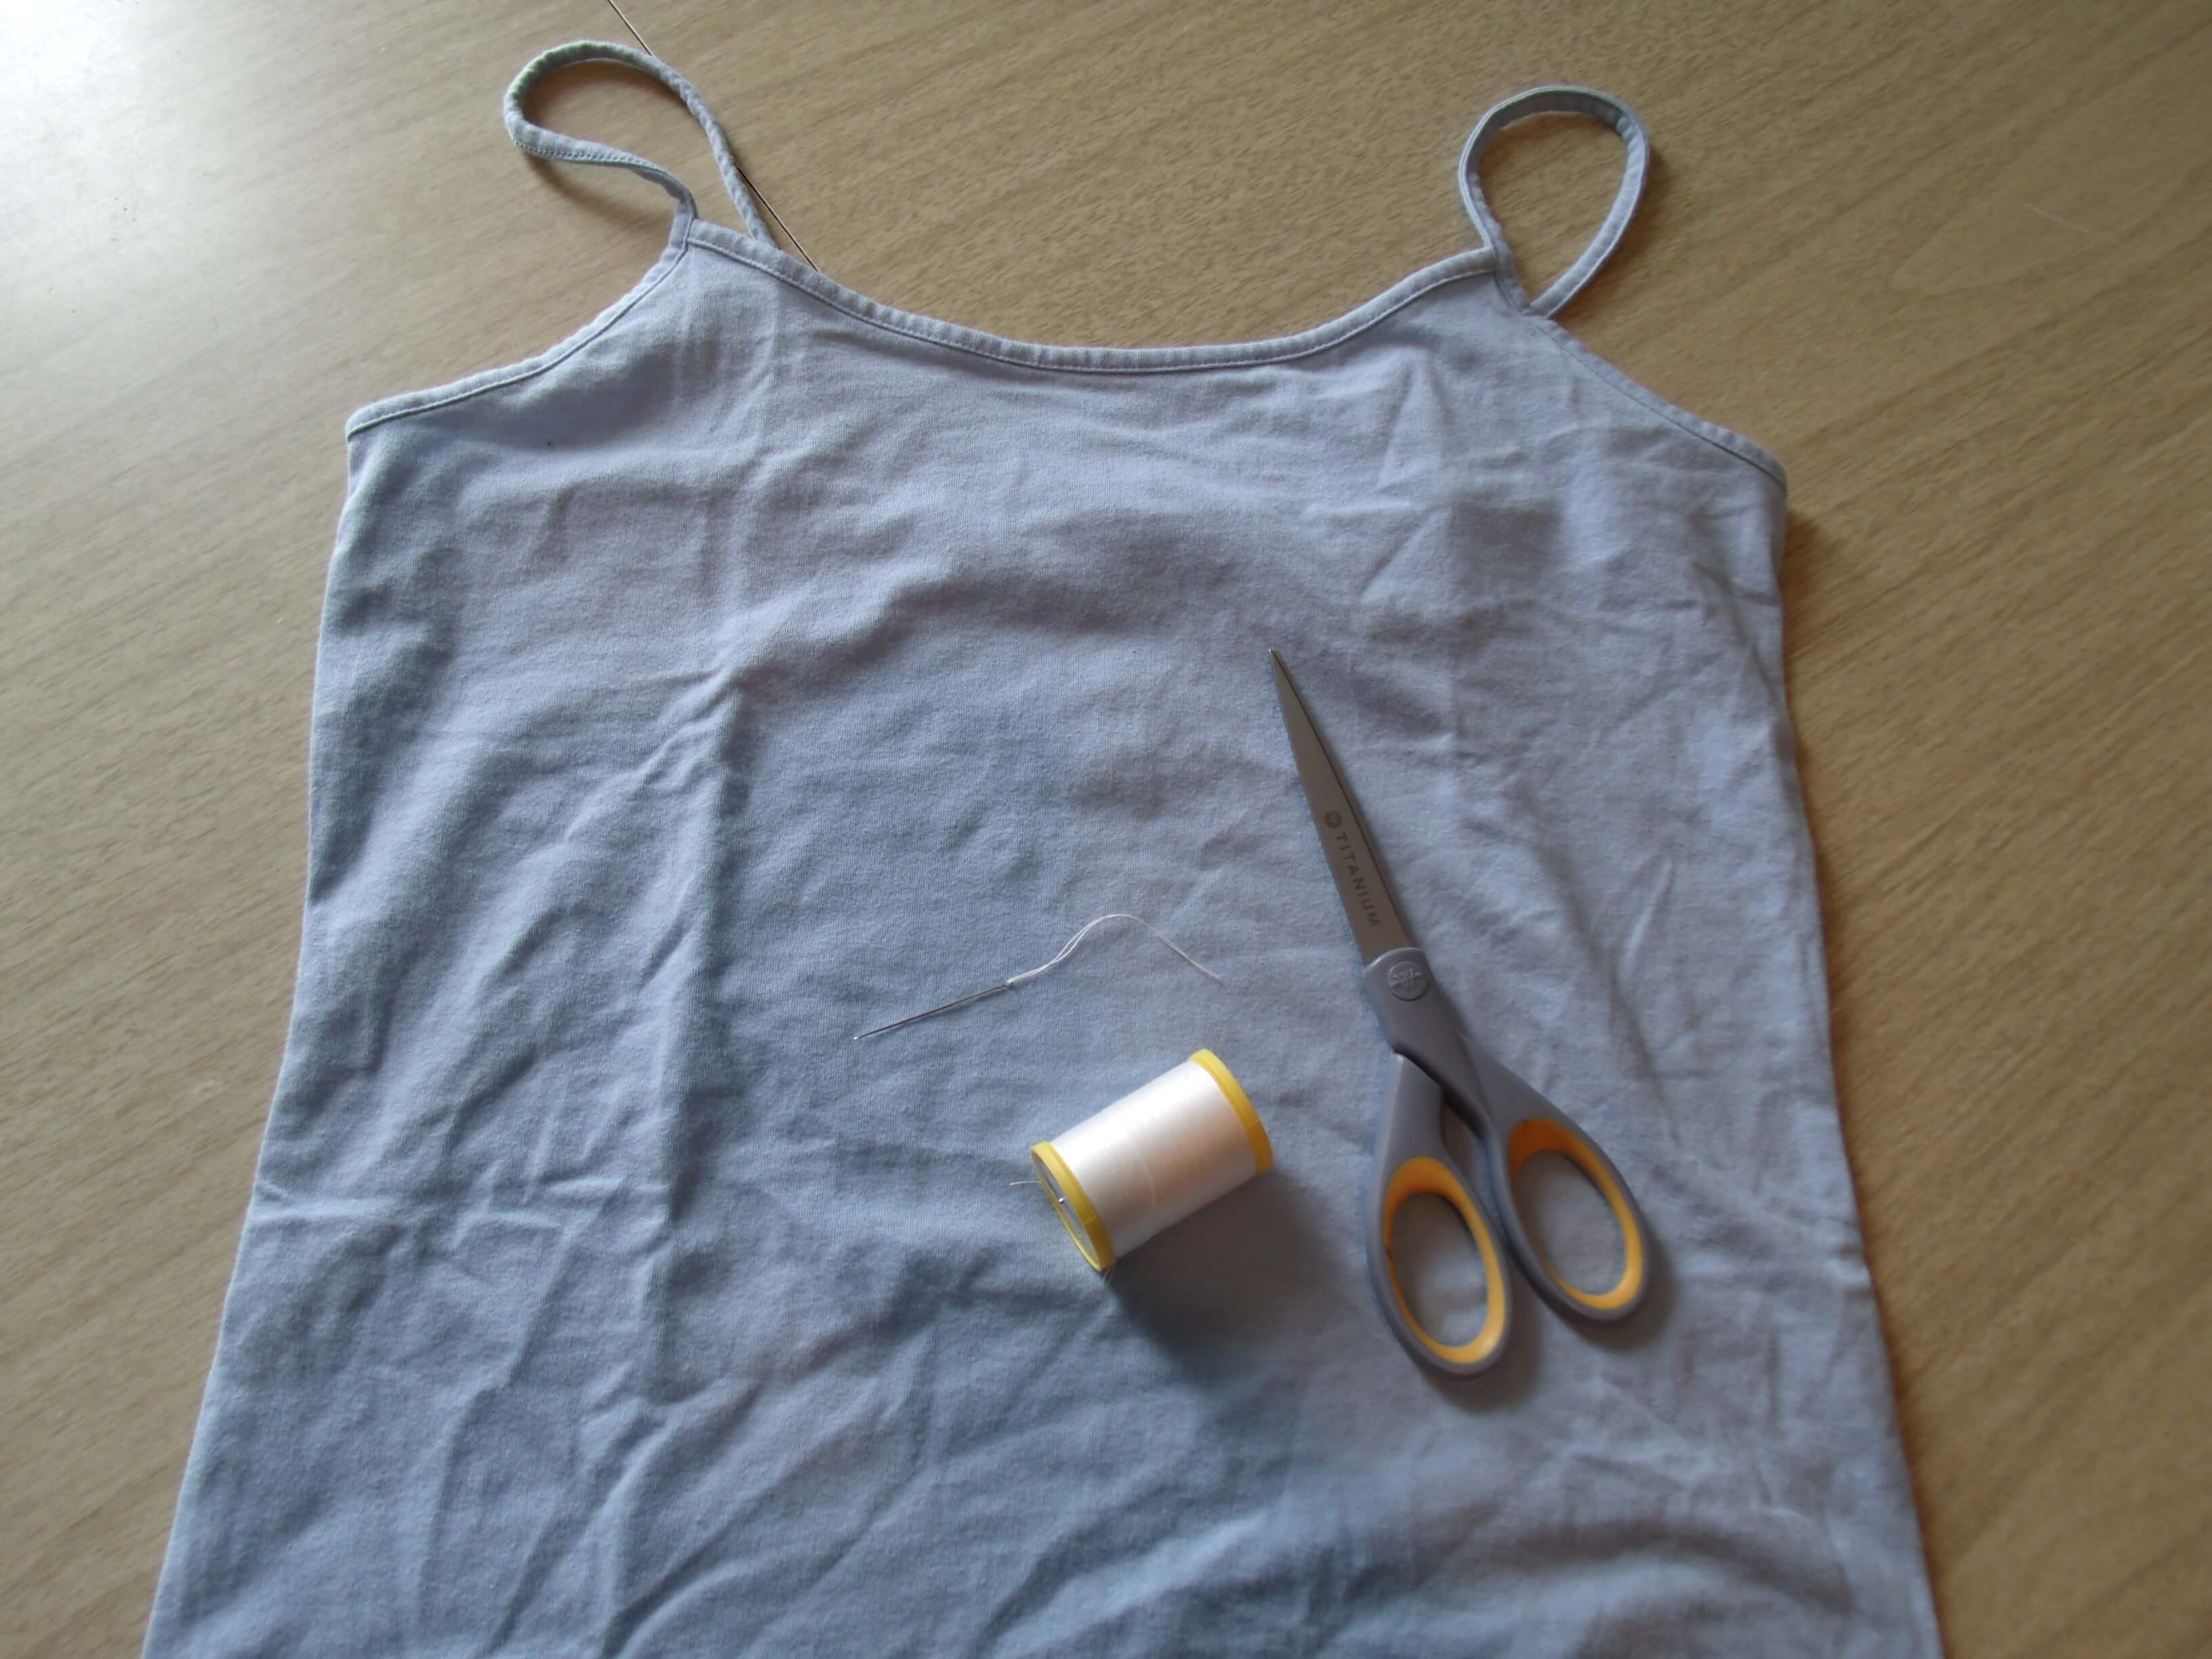 How To Make Your Own Nursing Tank Tops?